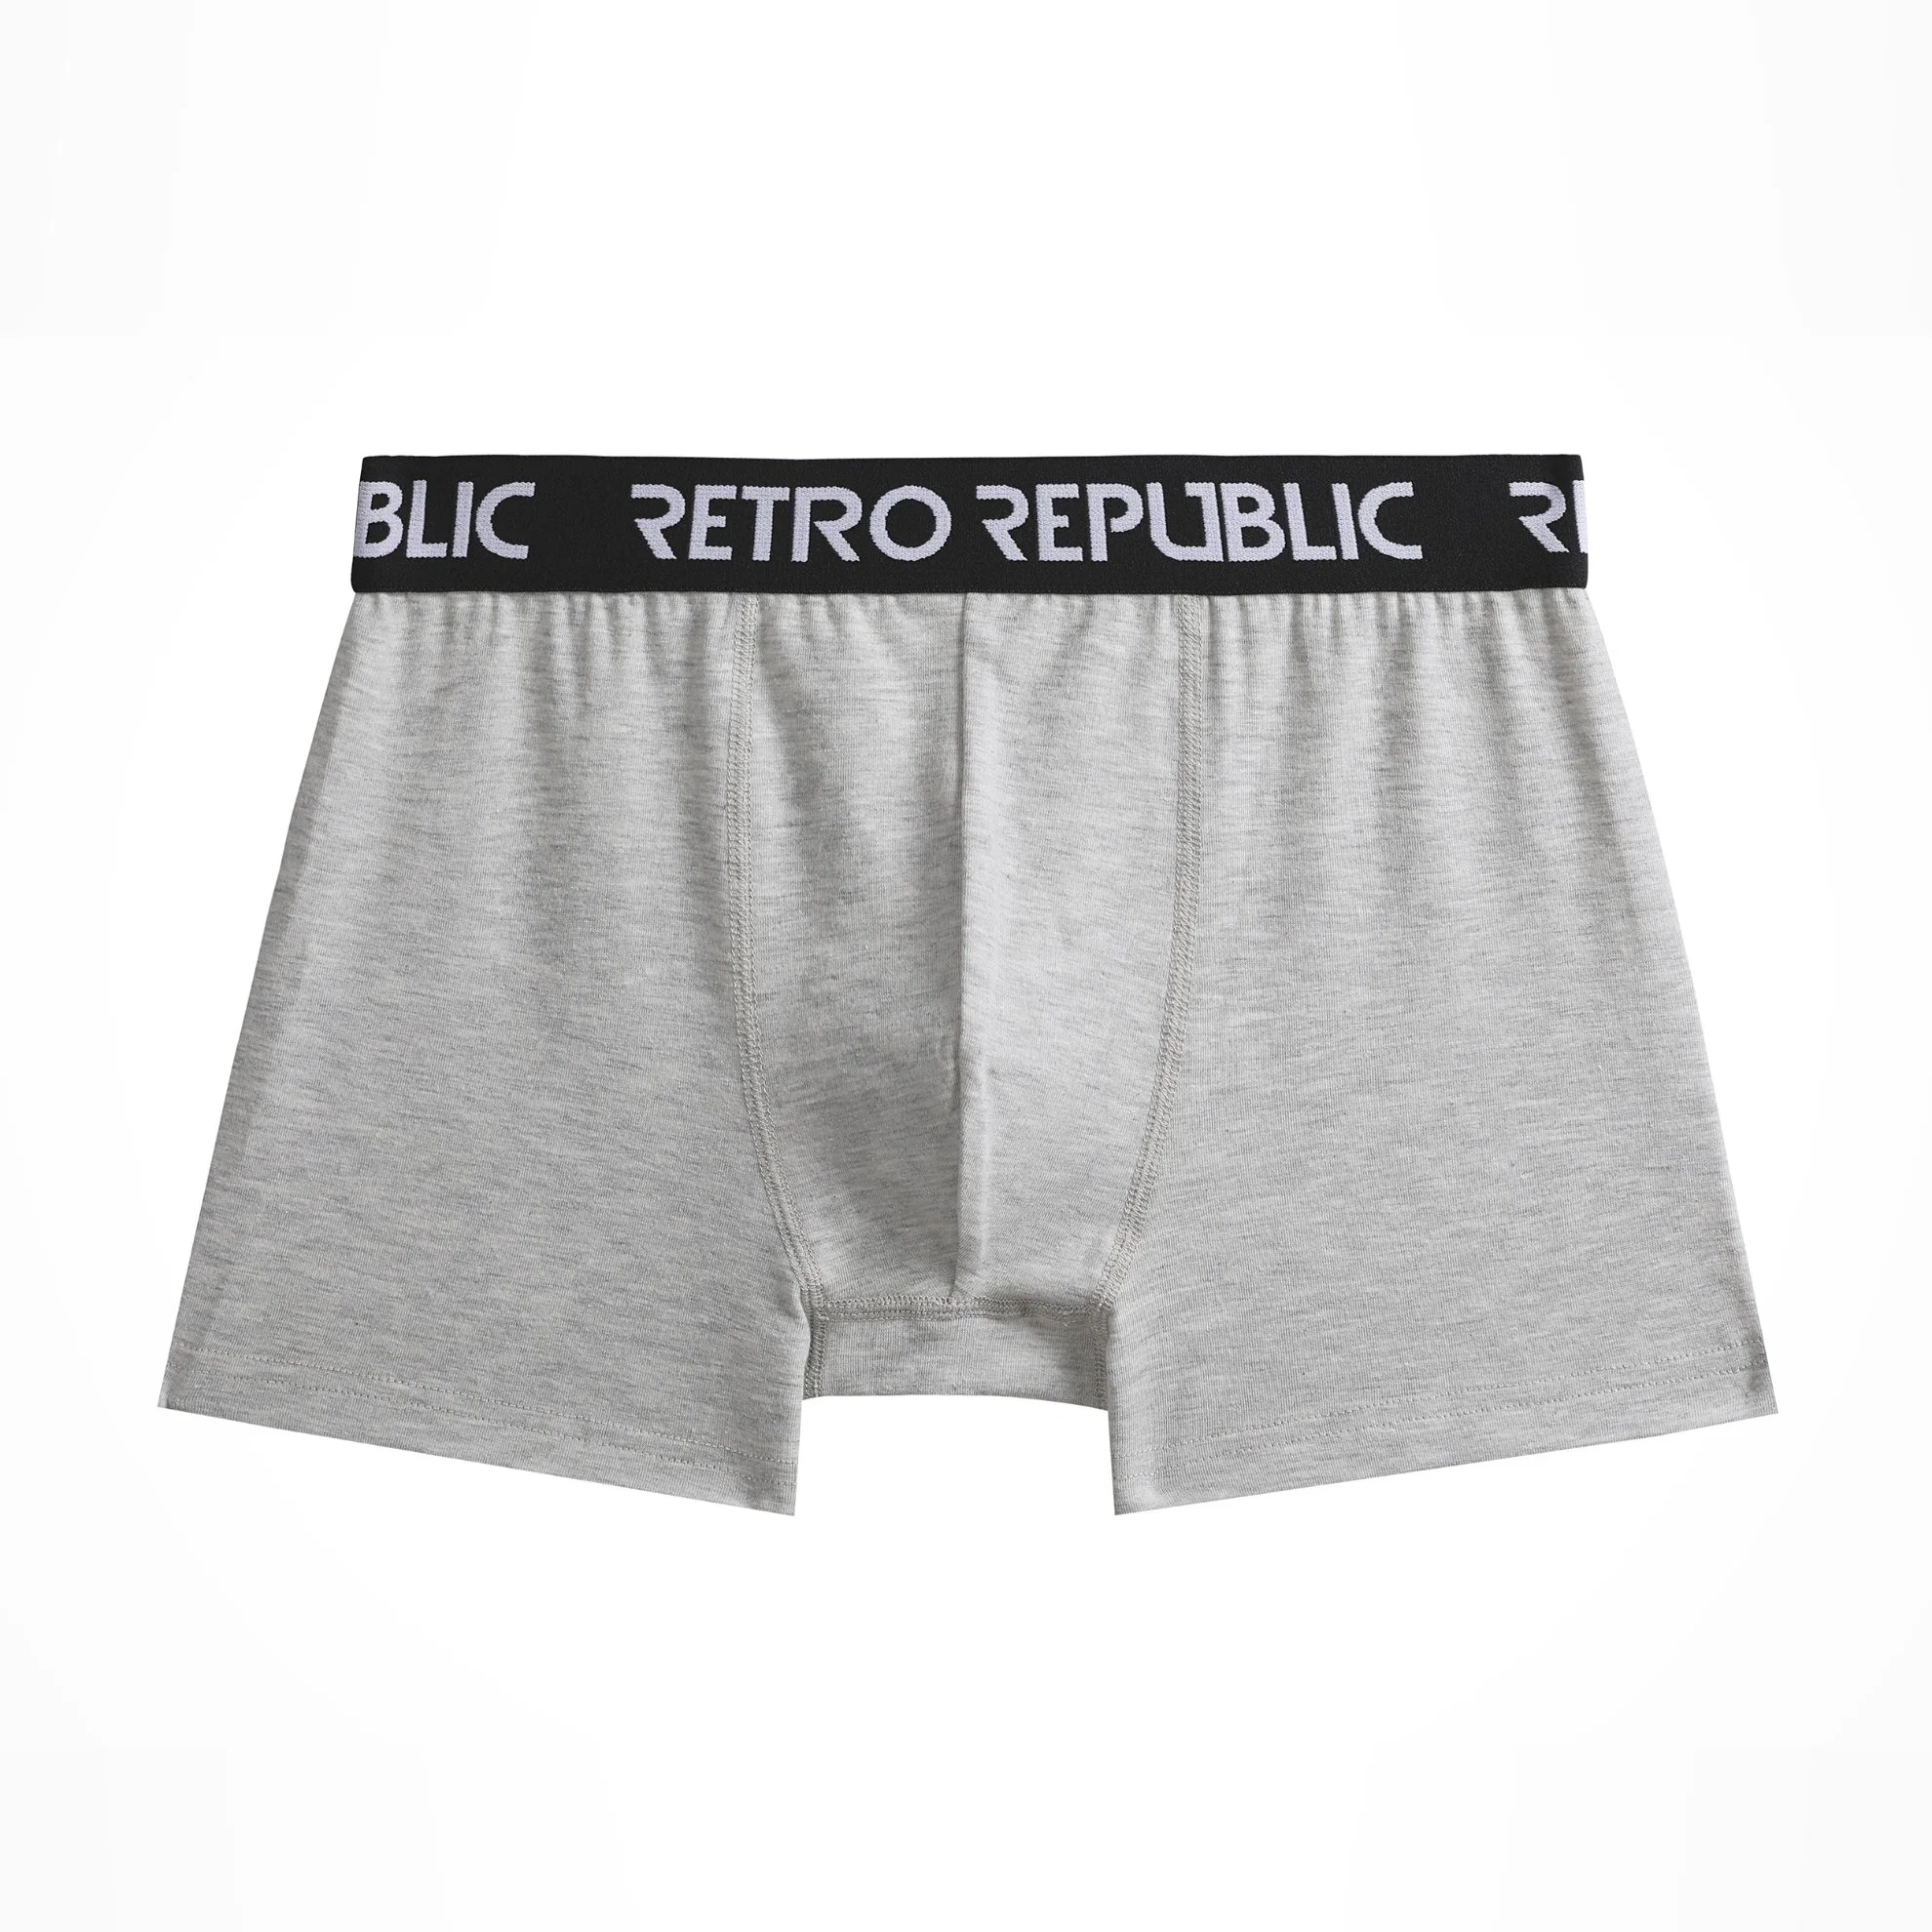 2023 Basic Organic Cotton Grey Comfortable Breathable Wicking Men Boxer with High Quality Black Wide Logo Printed Elastic